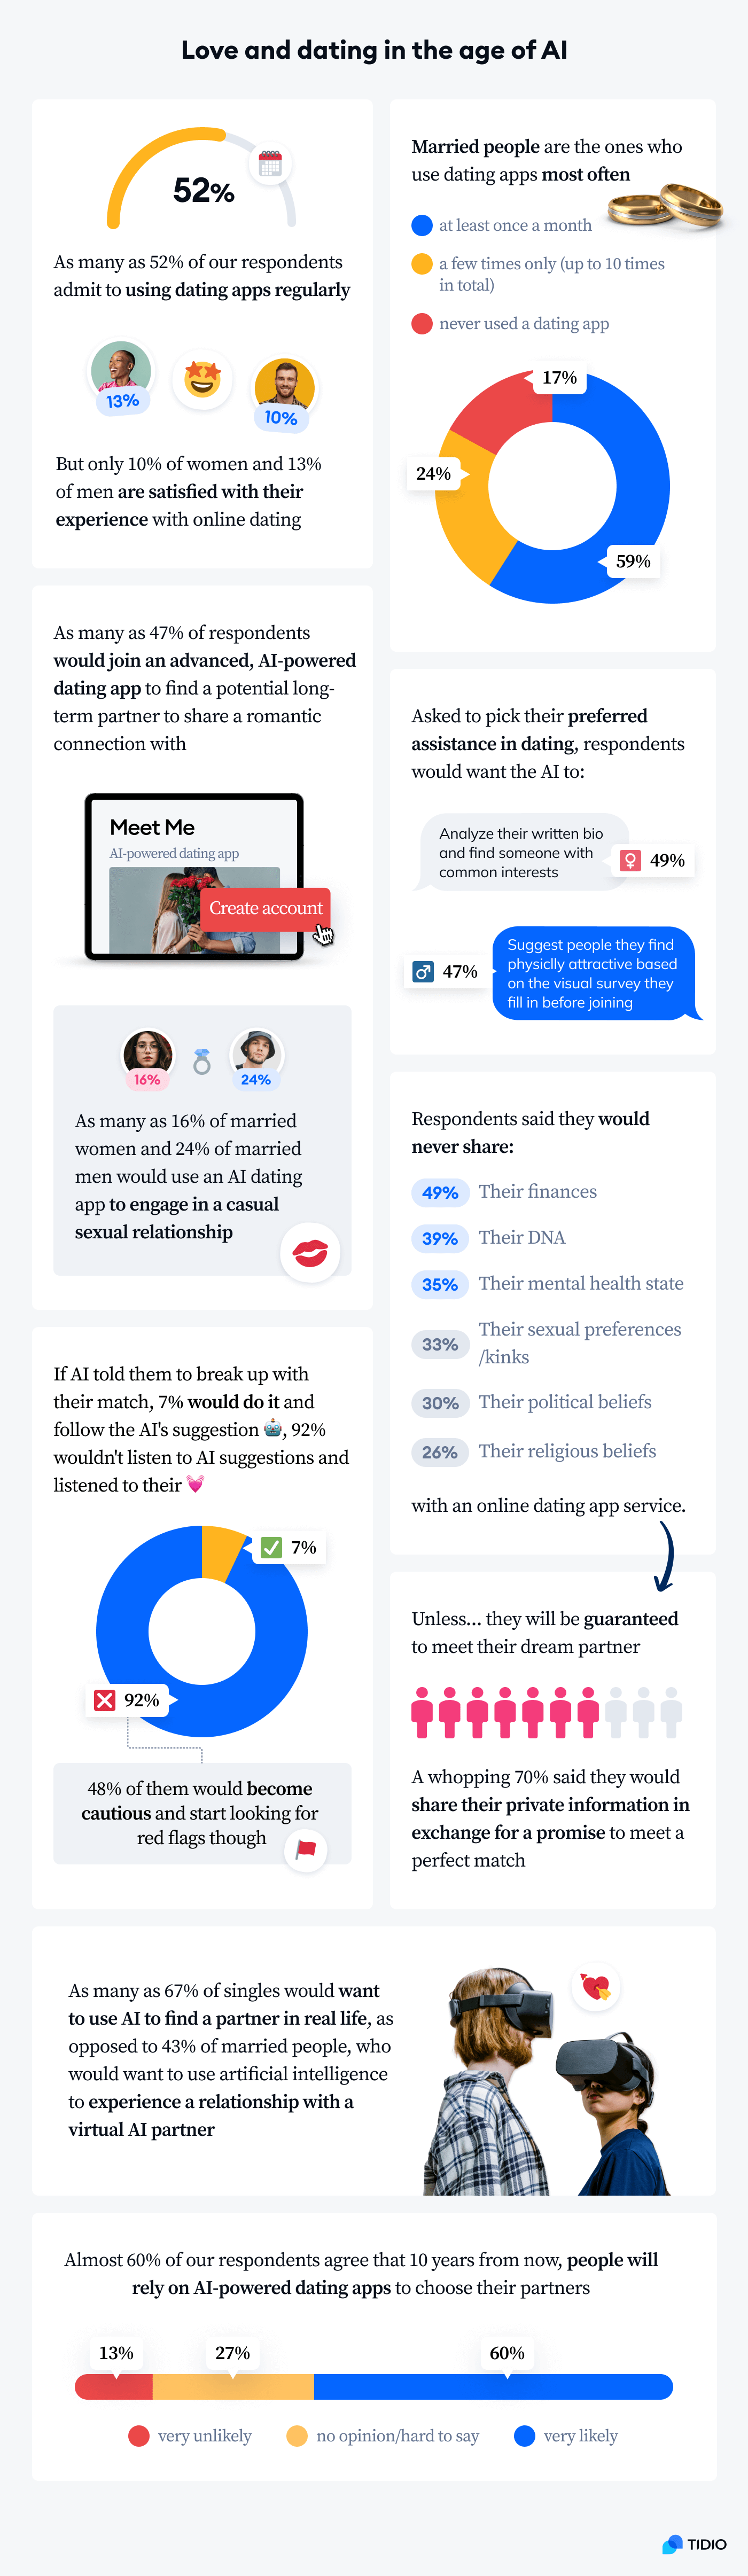 An infographic with major findings on Love in the age of AI dating apps